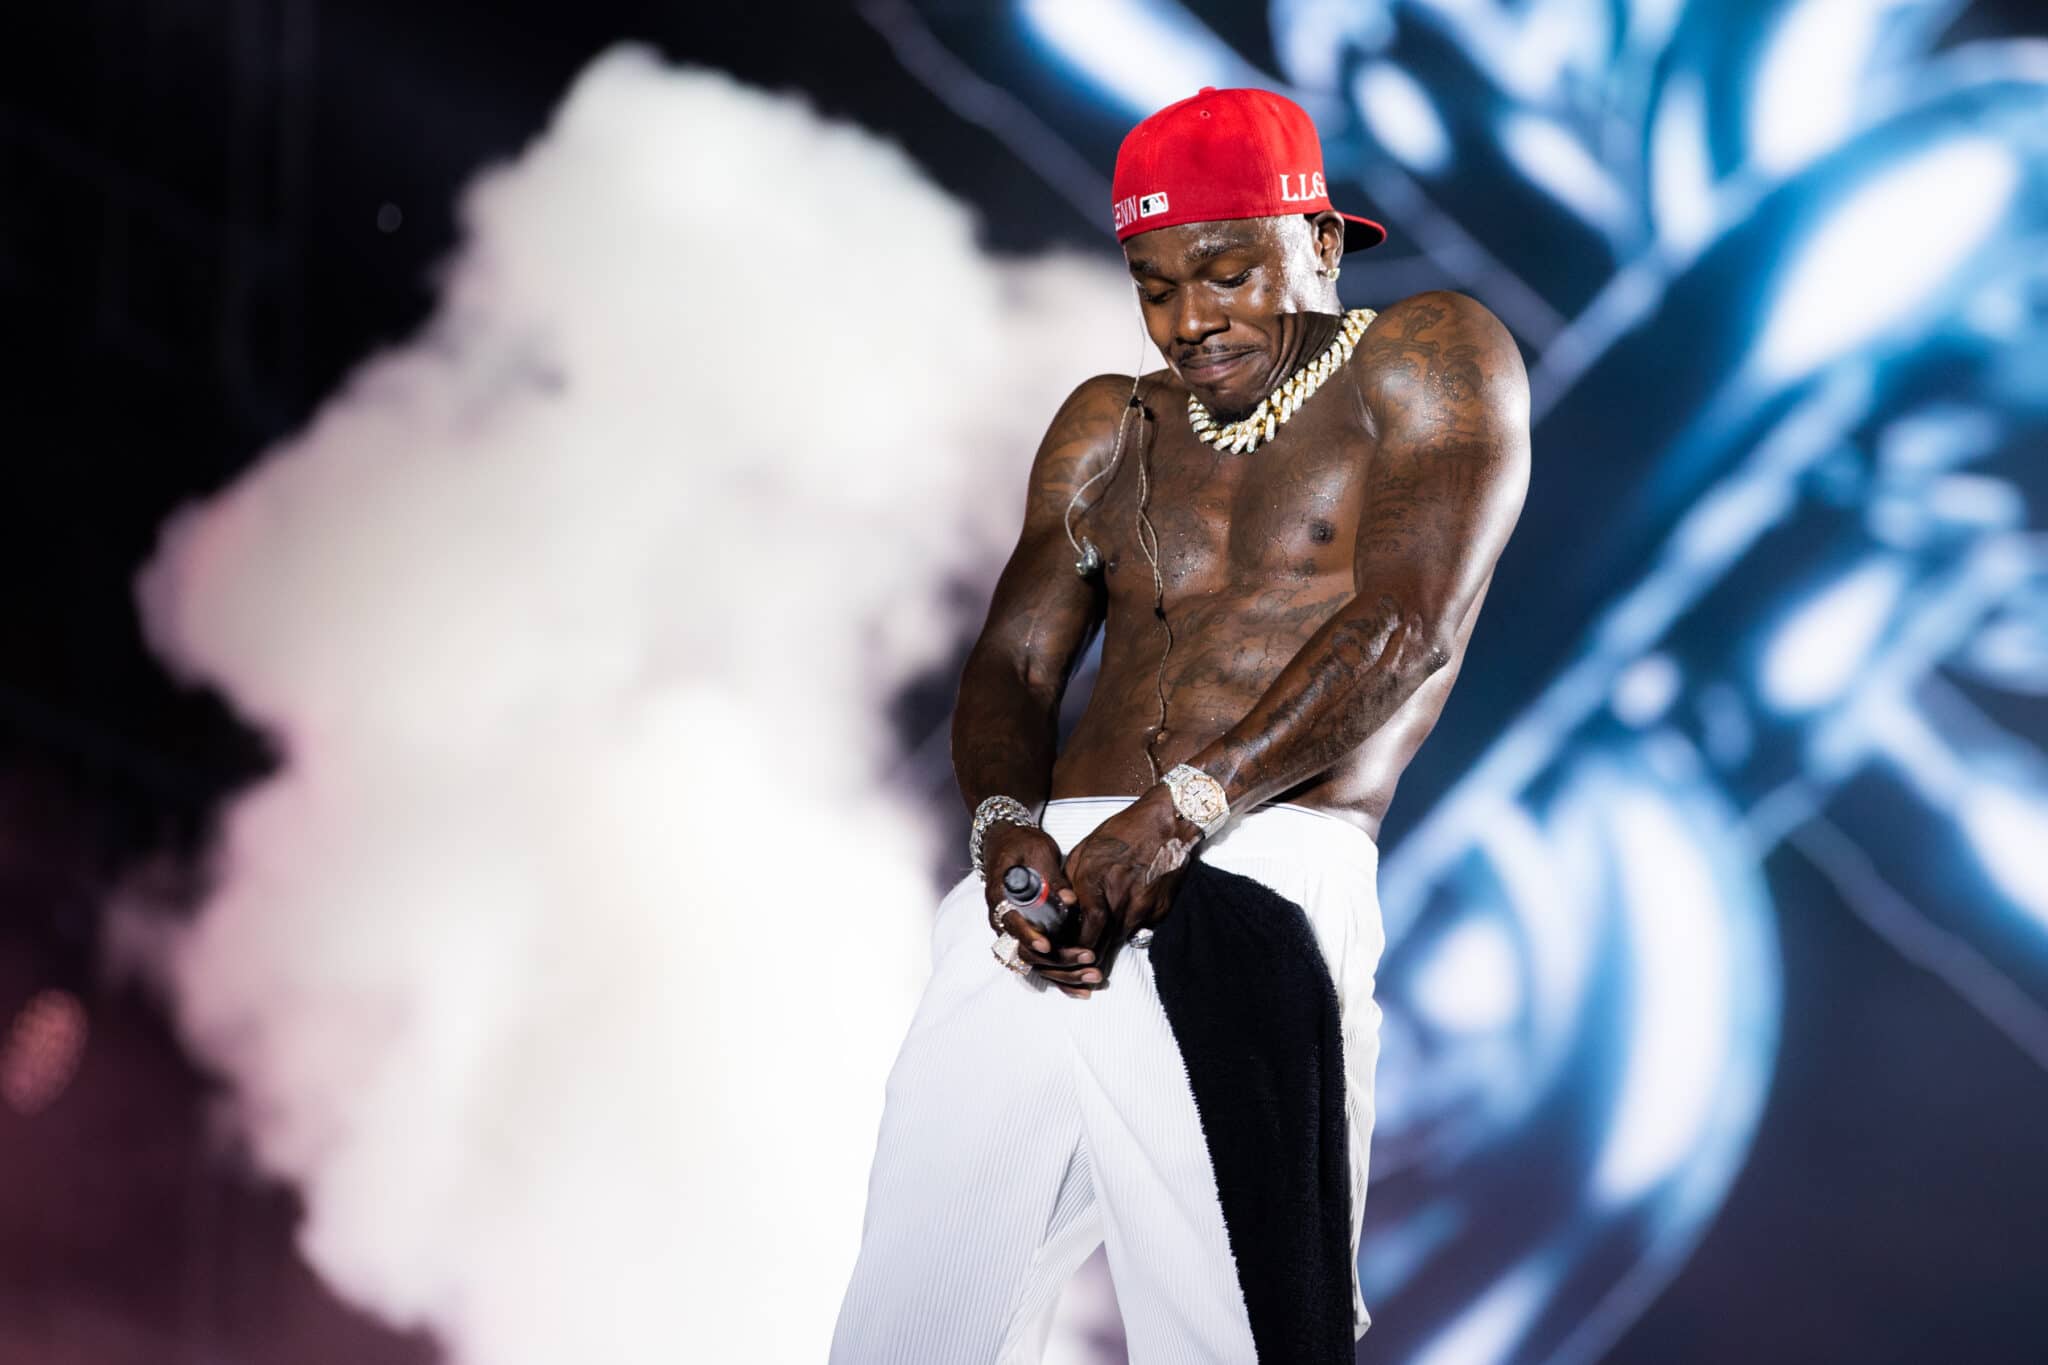 Lollapalooza drops DaBaby performance after homophobic comments, DaBaby